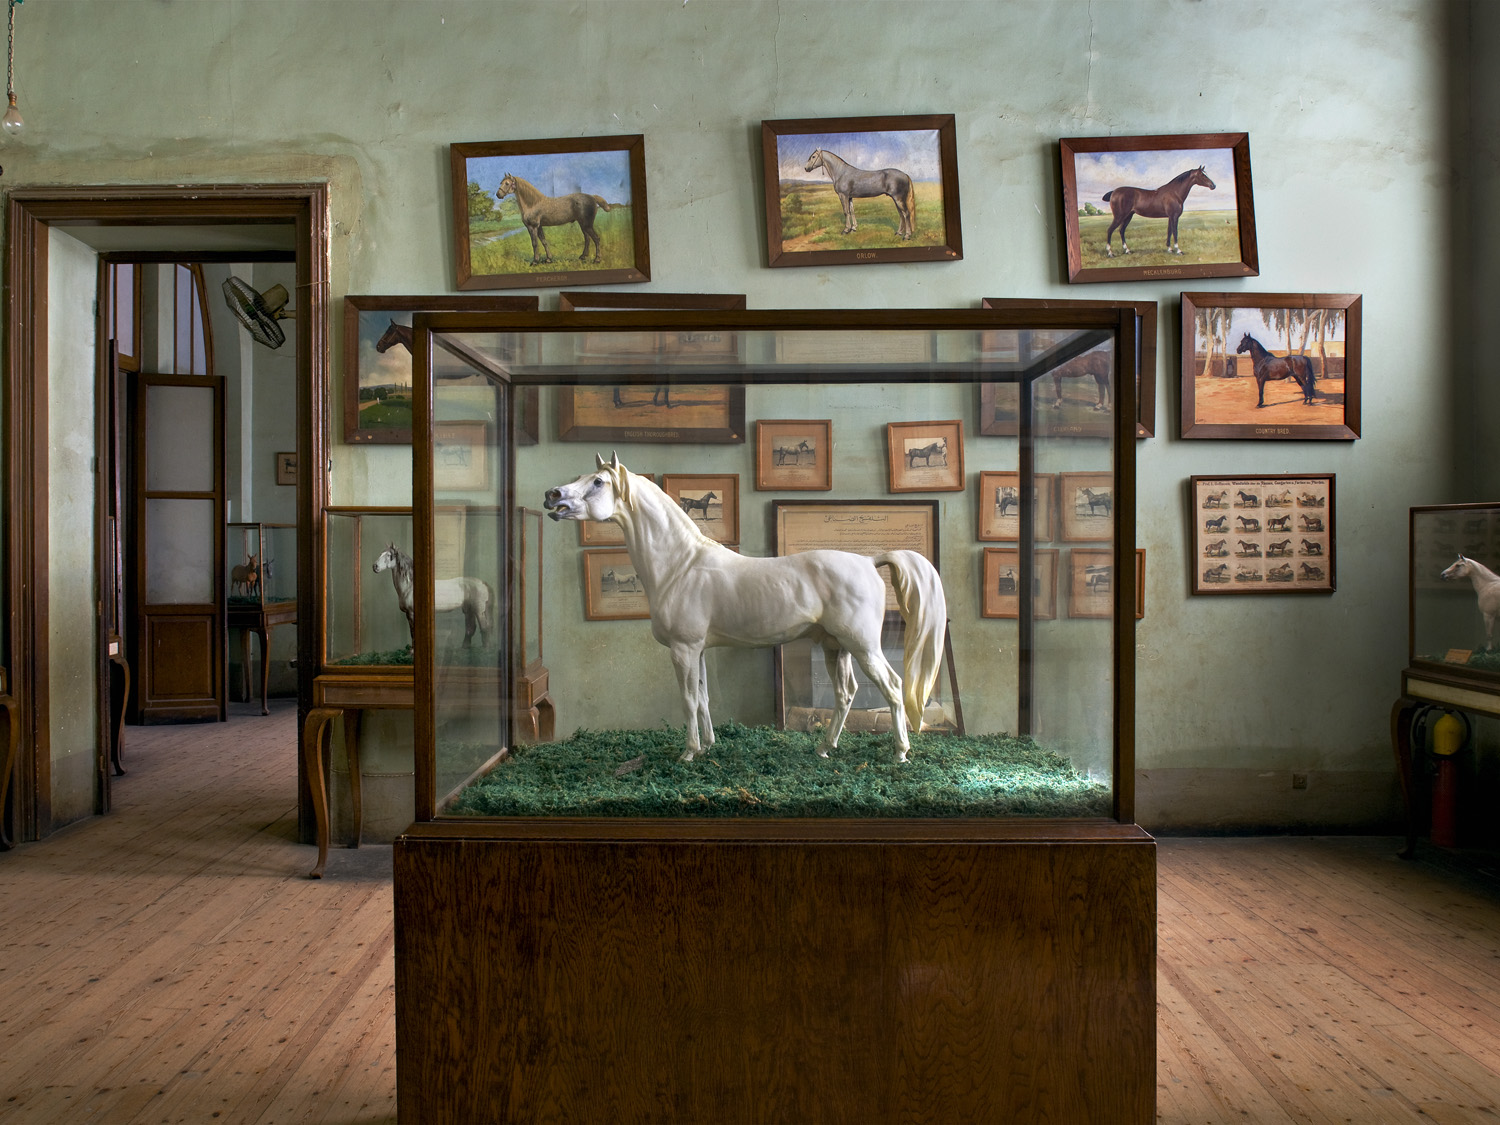  Horses, The Agriculture Museum in Cairo, 2007 